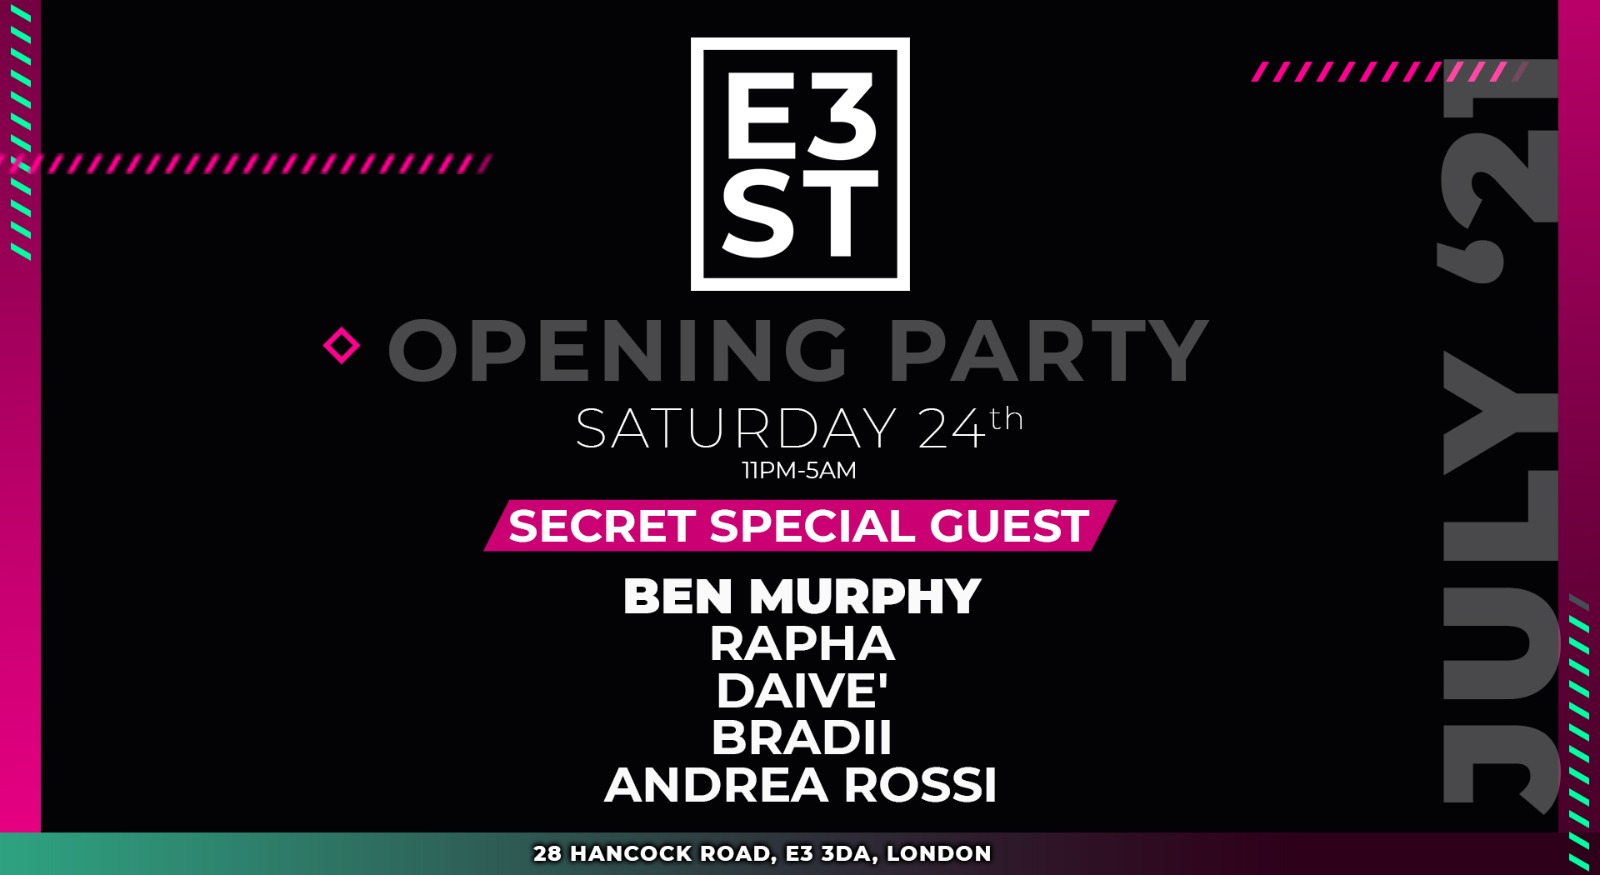 E3st OPENING PARTY